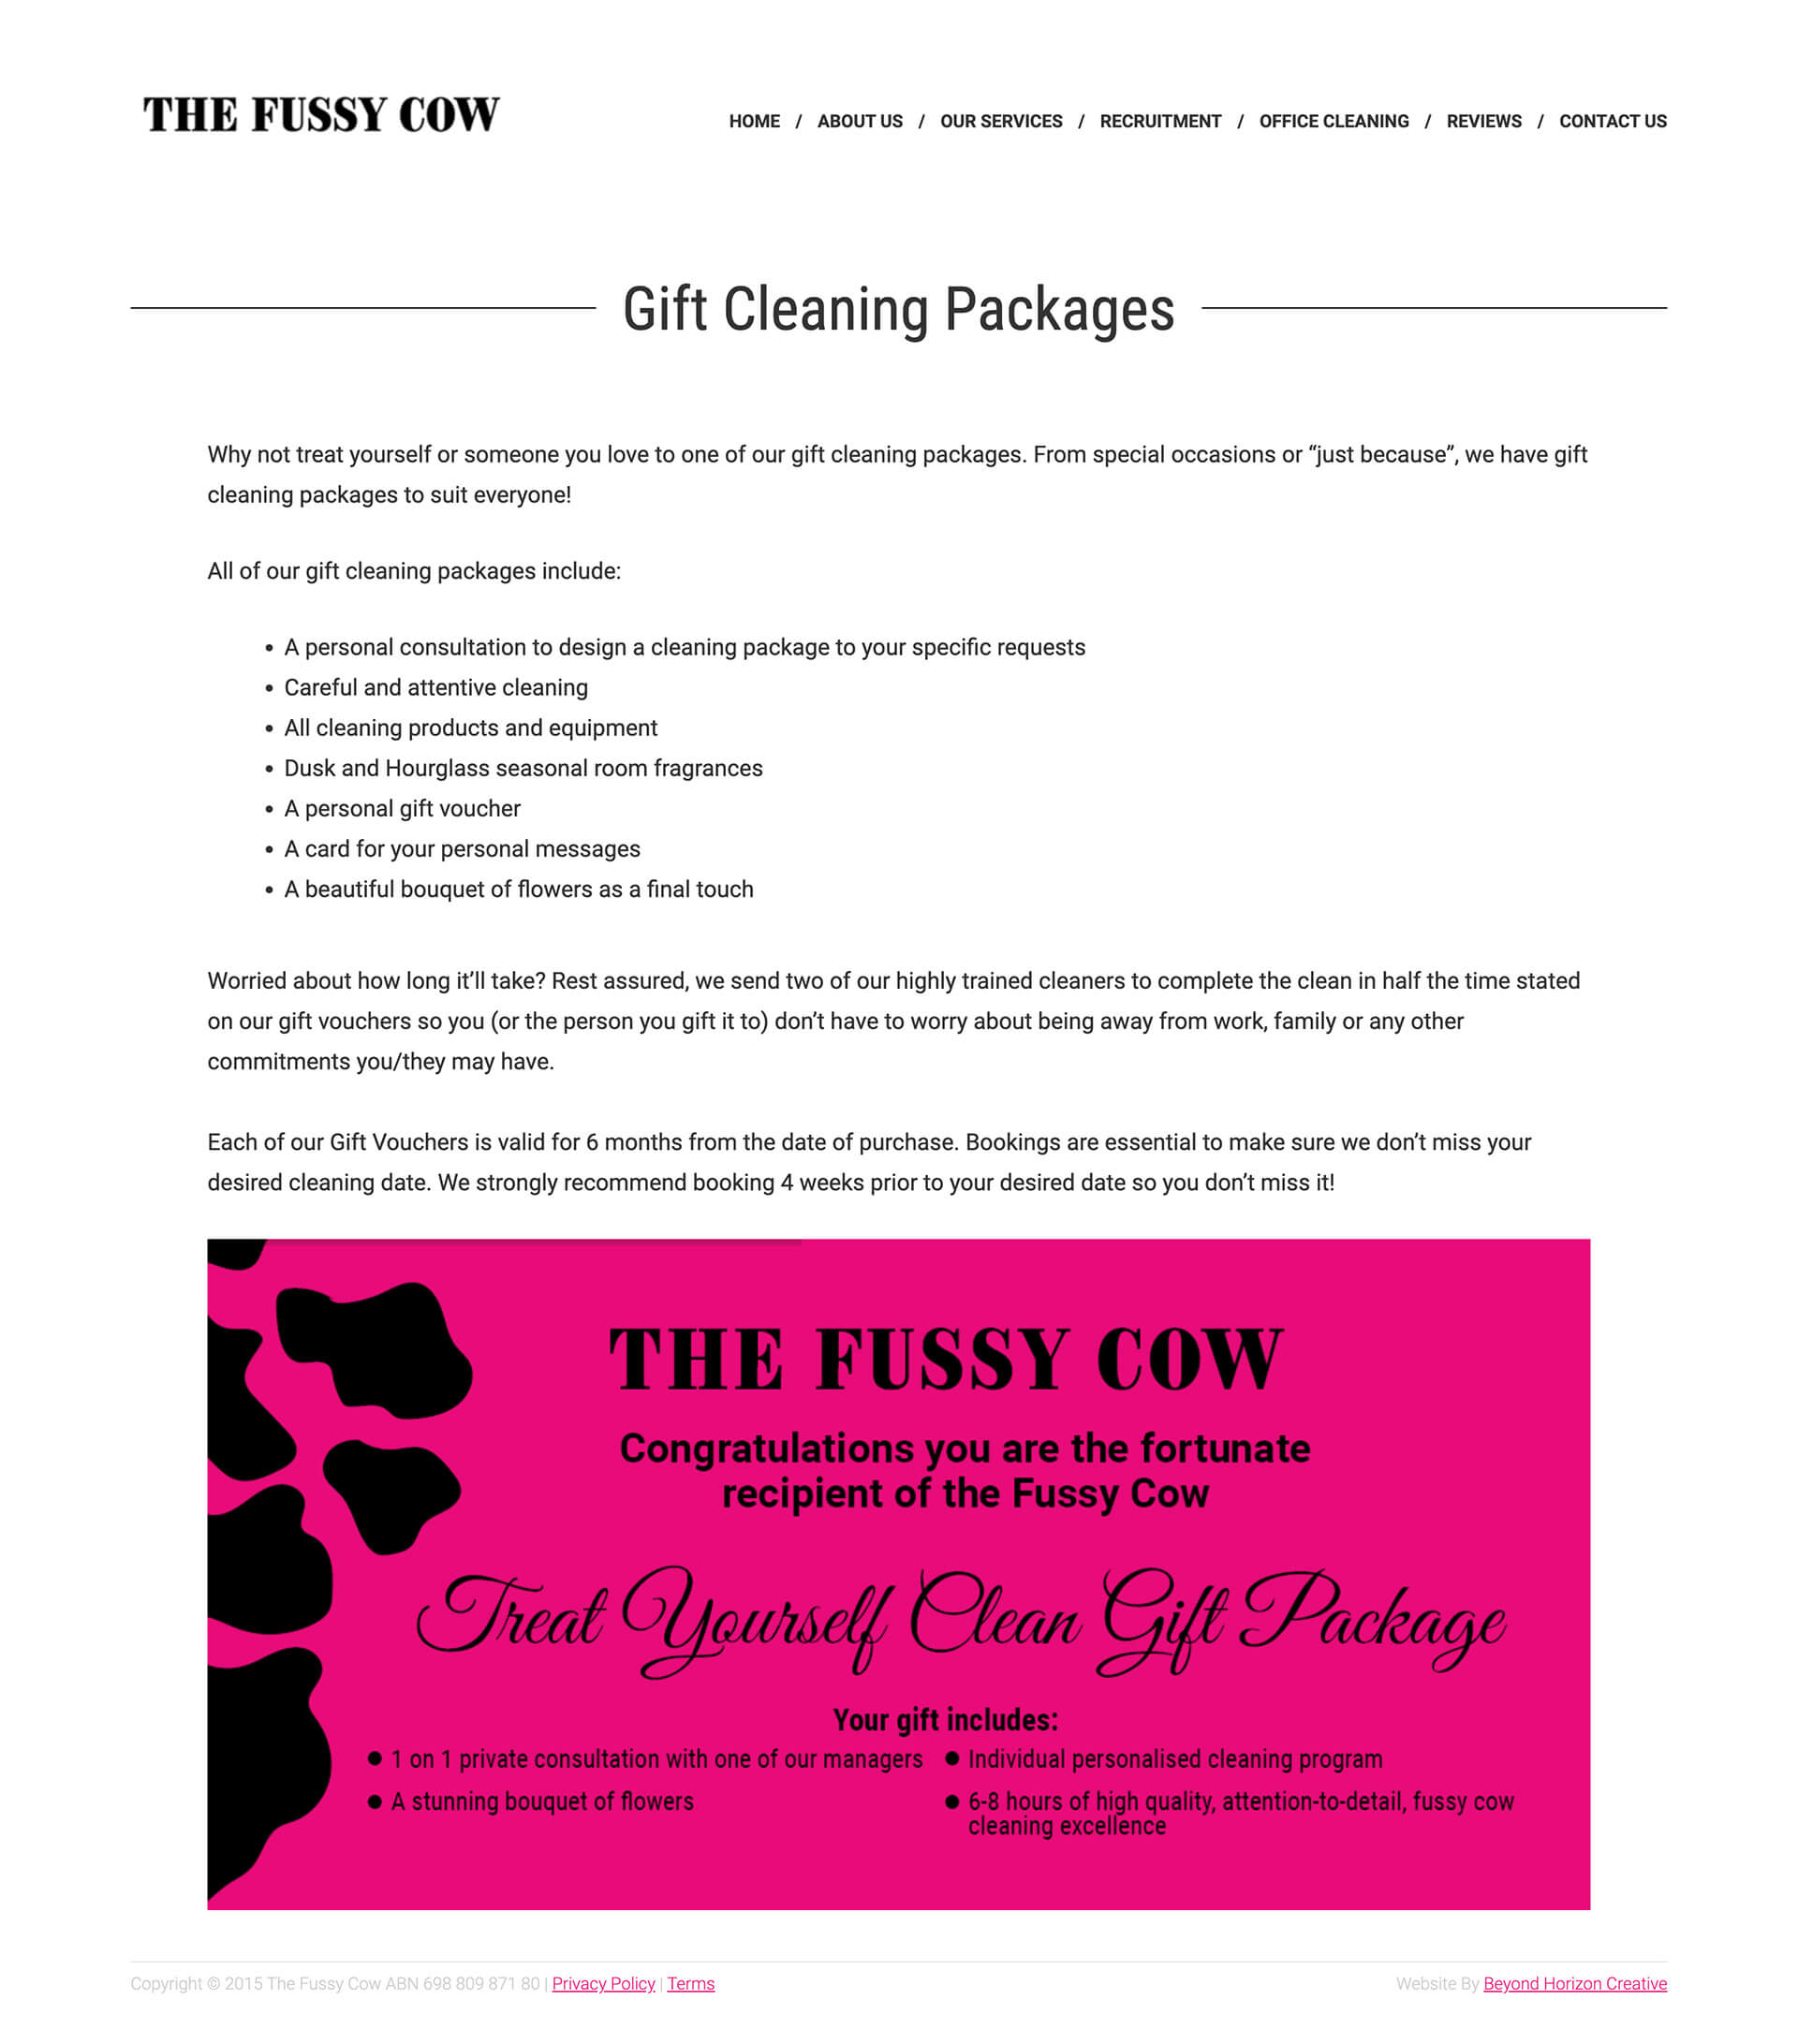 Fussy cow website sample